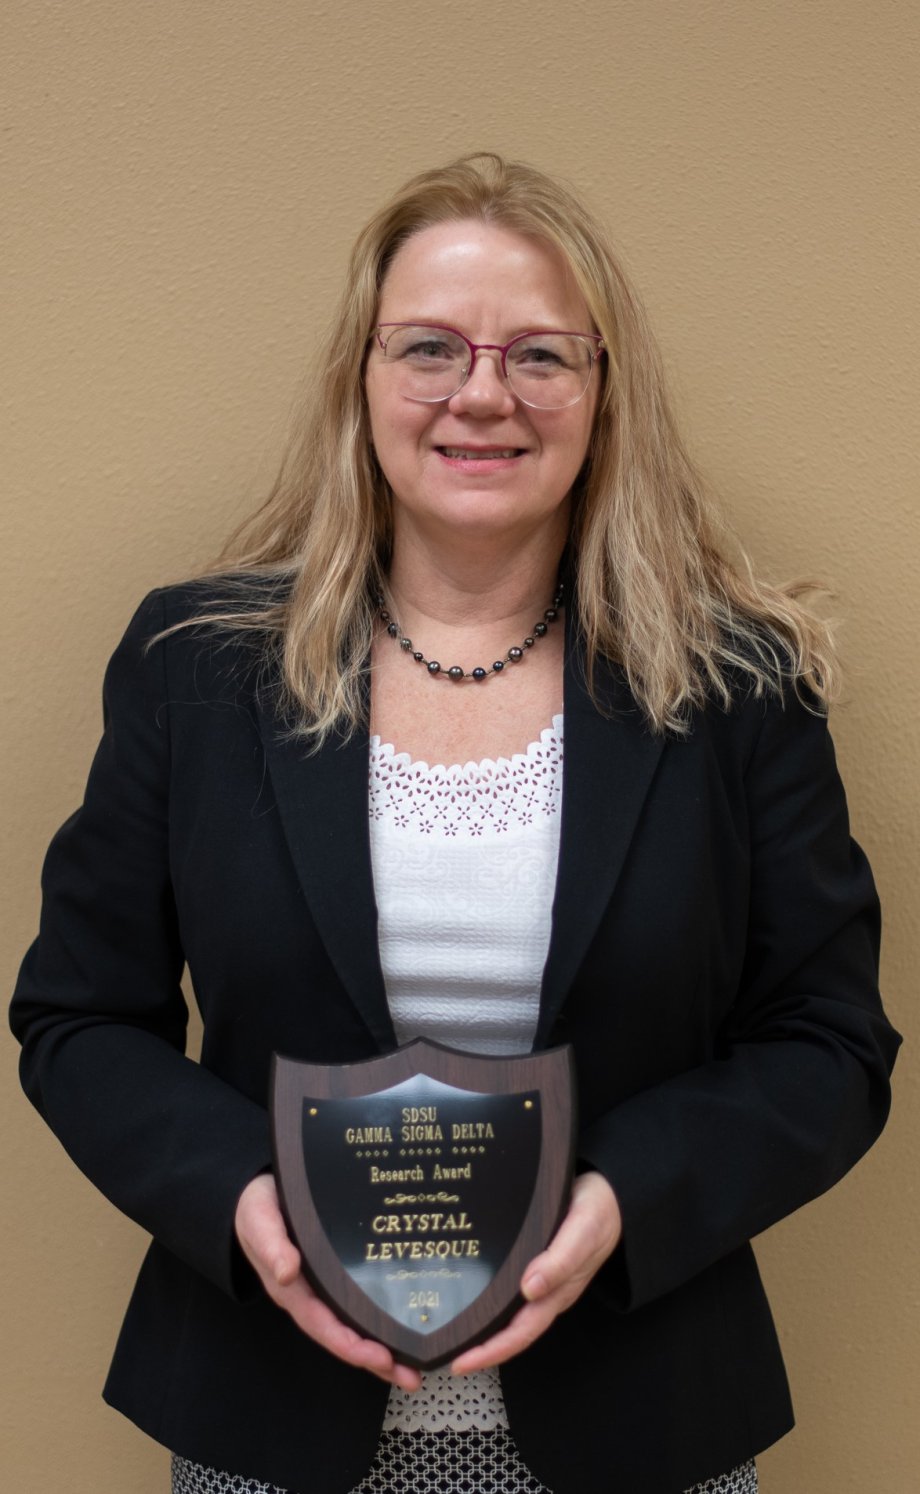 Photo of Crystal Levesque – with GSD Excellence in Research Award